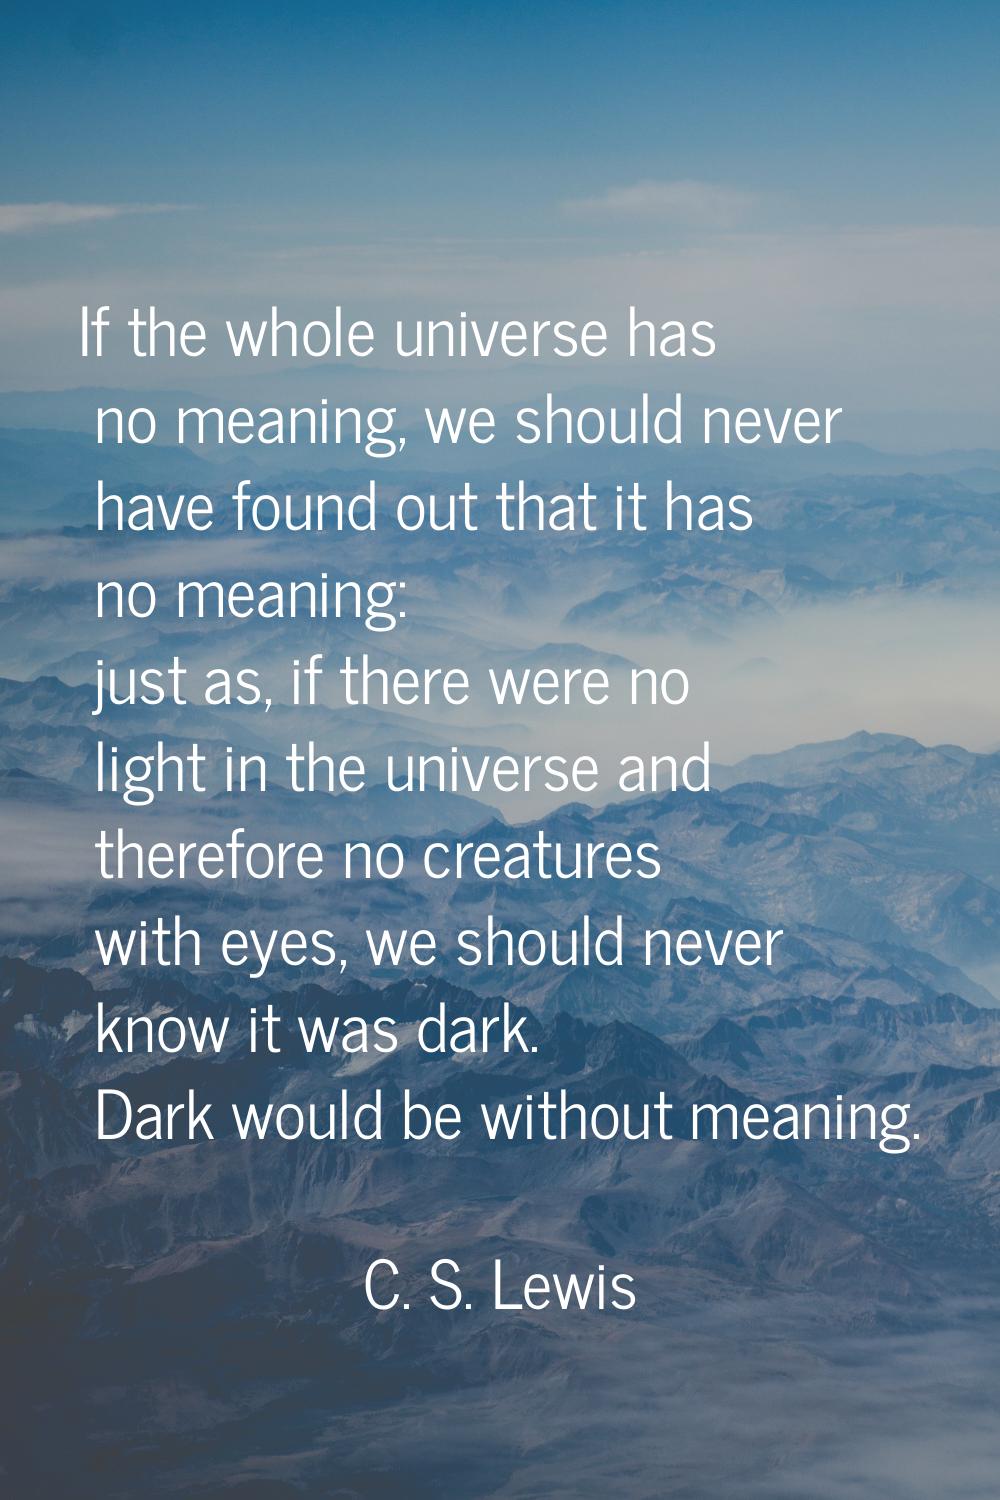 If the whole universe has no meaning, we should never have found out that it has no meaning: just a